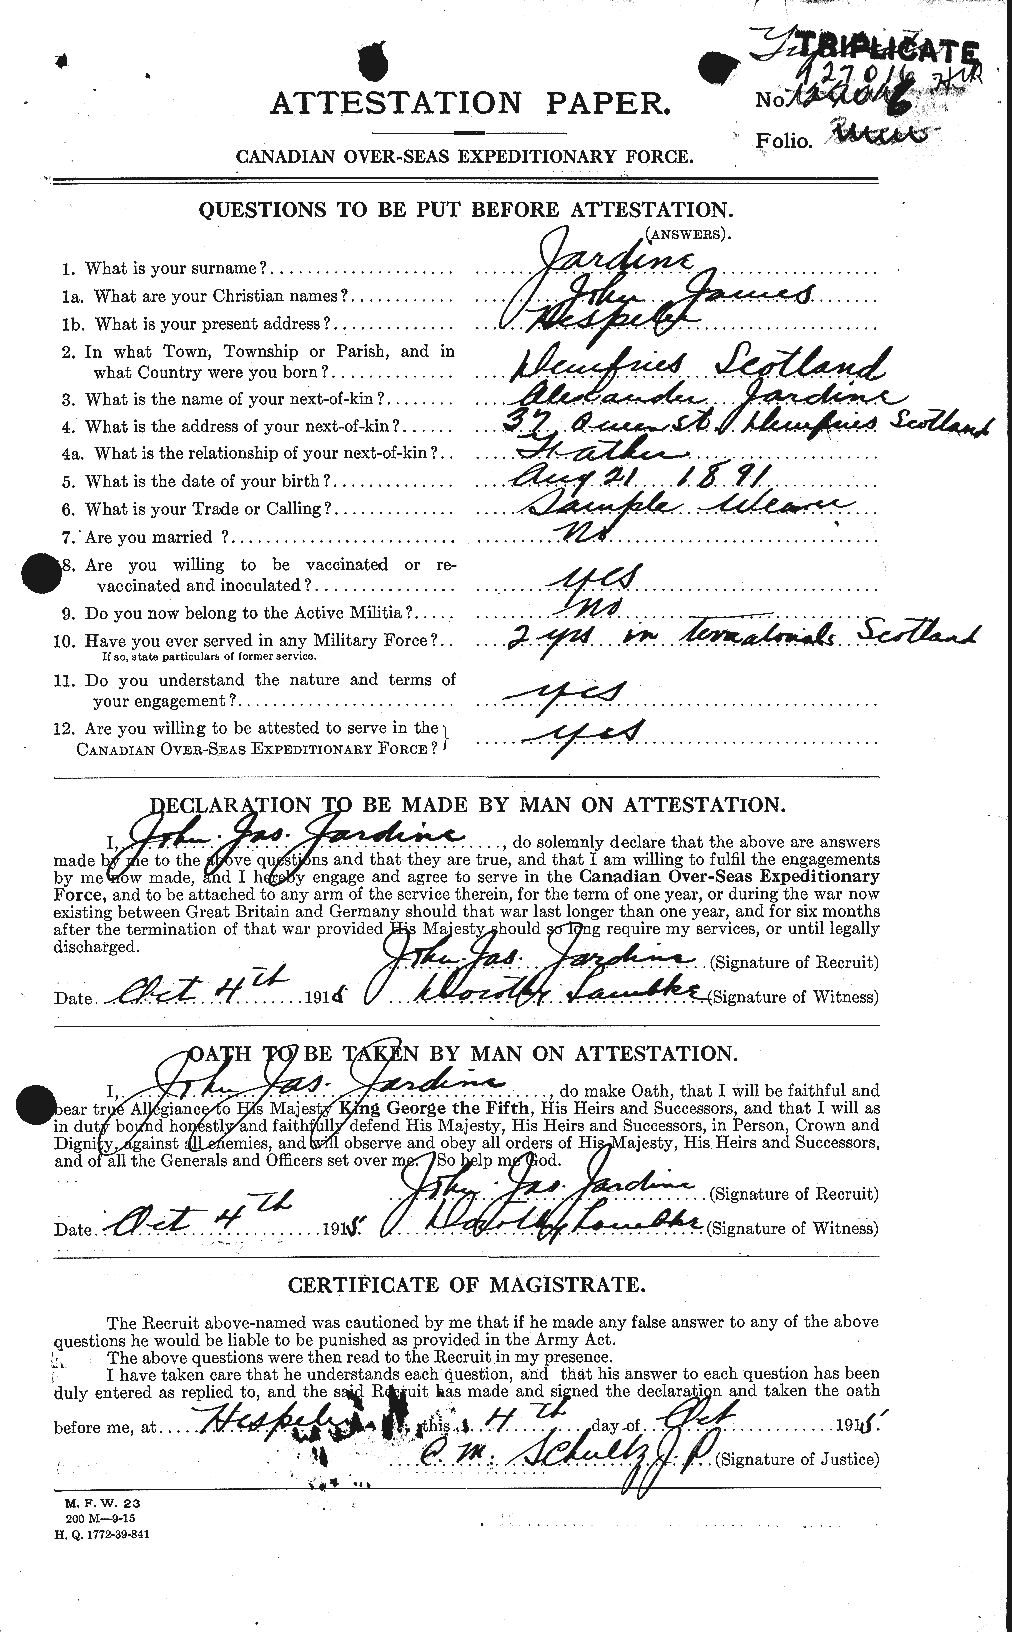 Personnel Records of the First World War - CEF 416808a